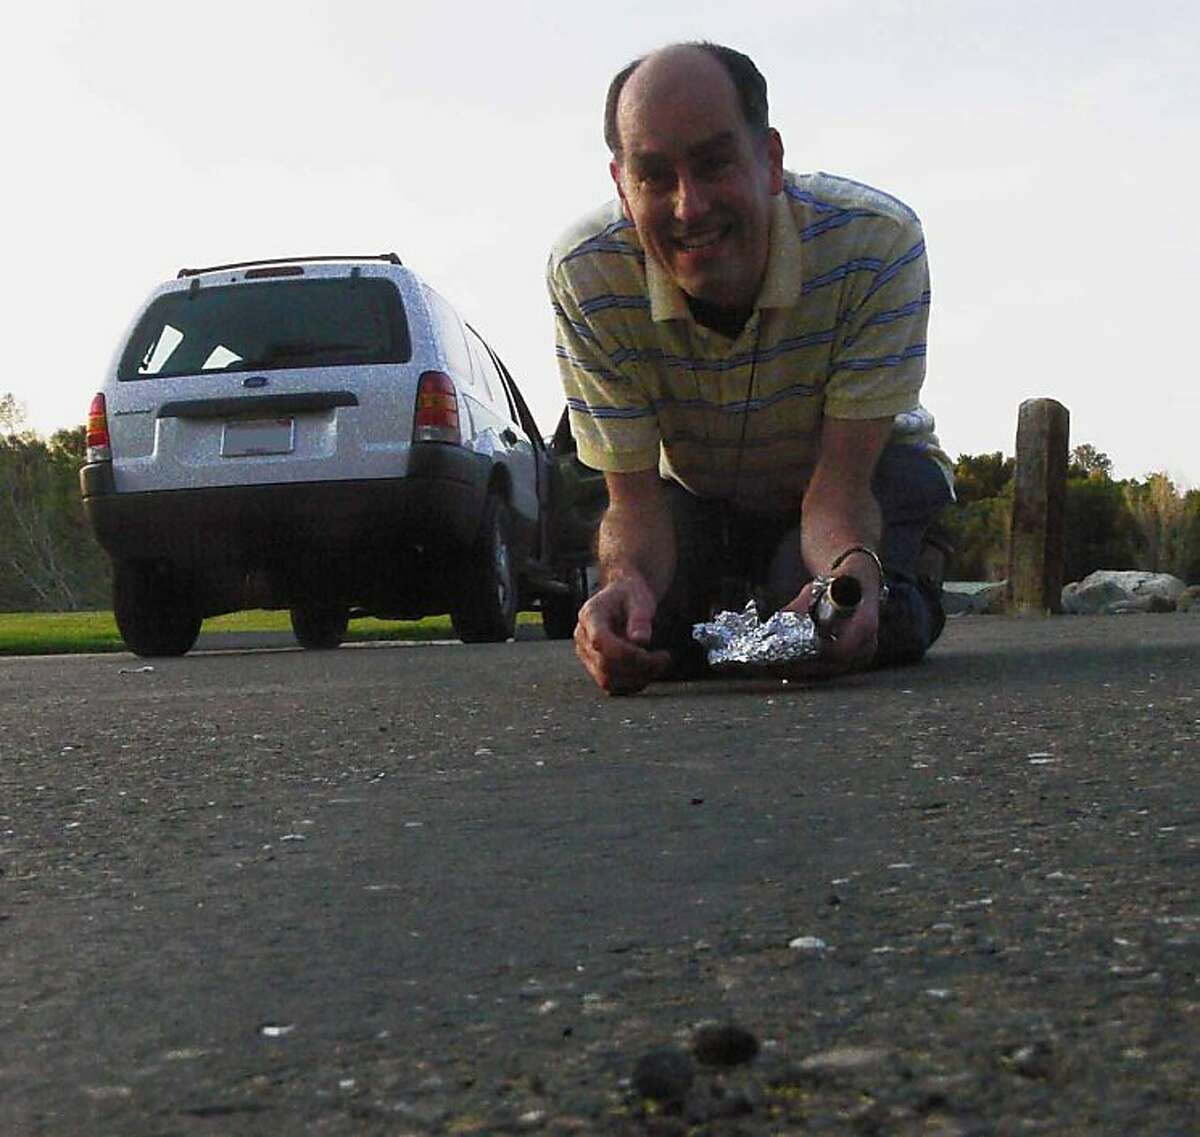 Petrus Jenniskens, the same NASA astronomer who trekked across the Nubian desert four years ago to recover fragments of a small asteroid and bring them home, said Wednesday he had found fragments of the space object on the asphalt parking lot of Henningsen? Lotus Park, located in the small town of Lotus in El Dorado County.